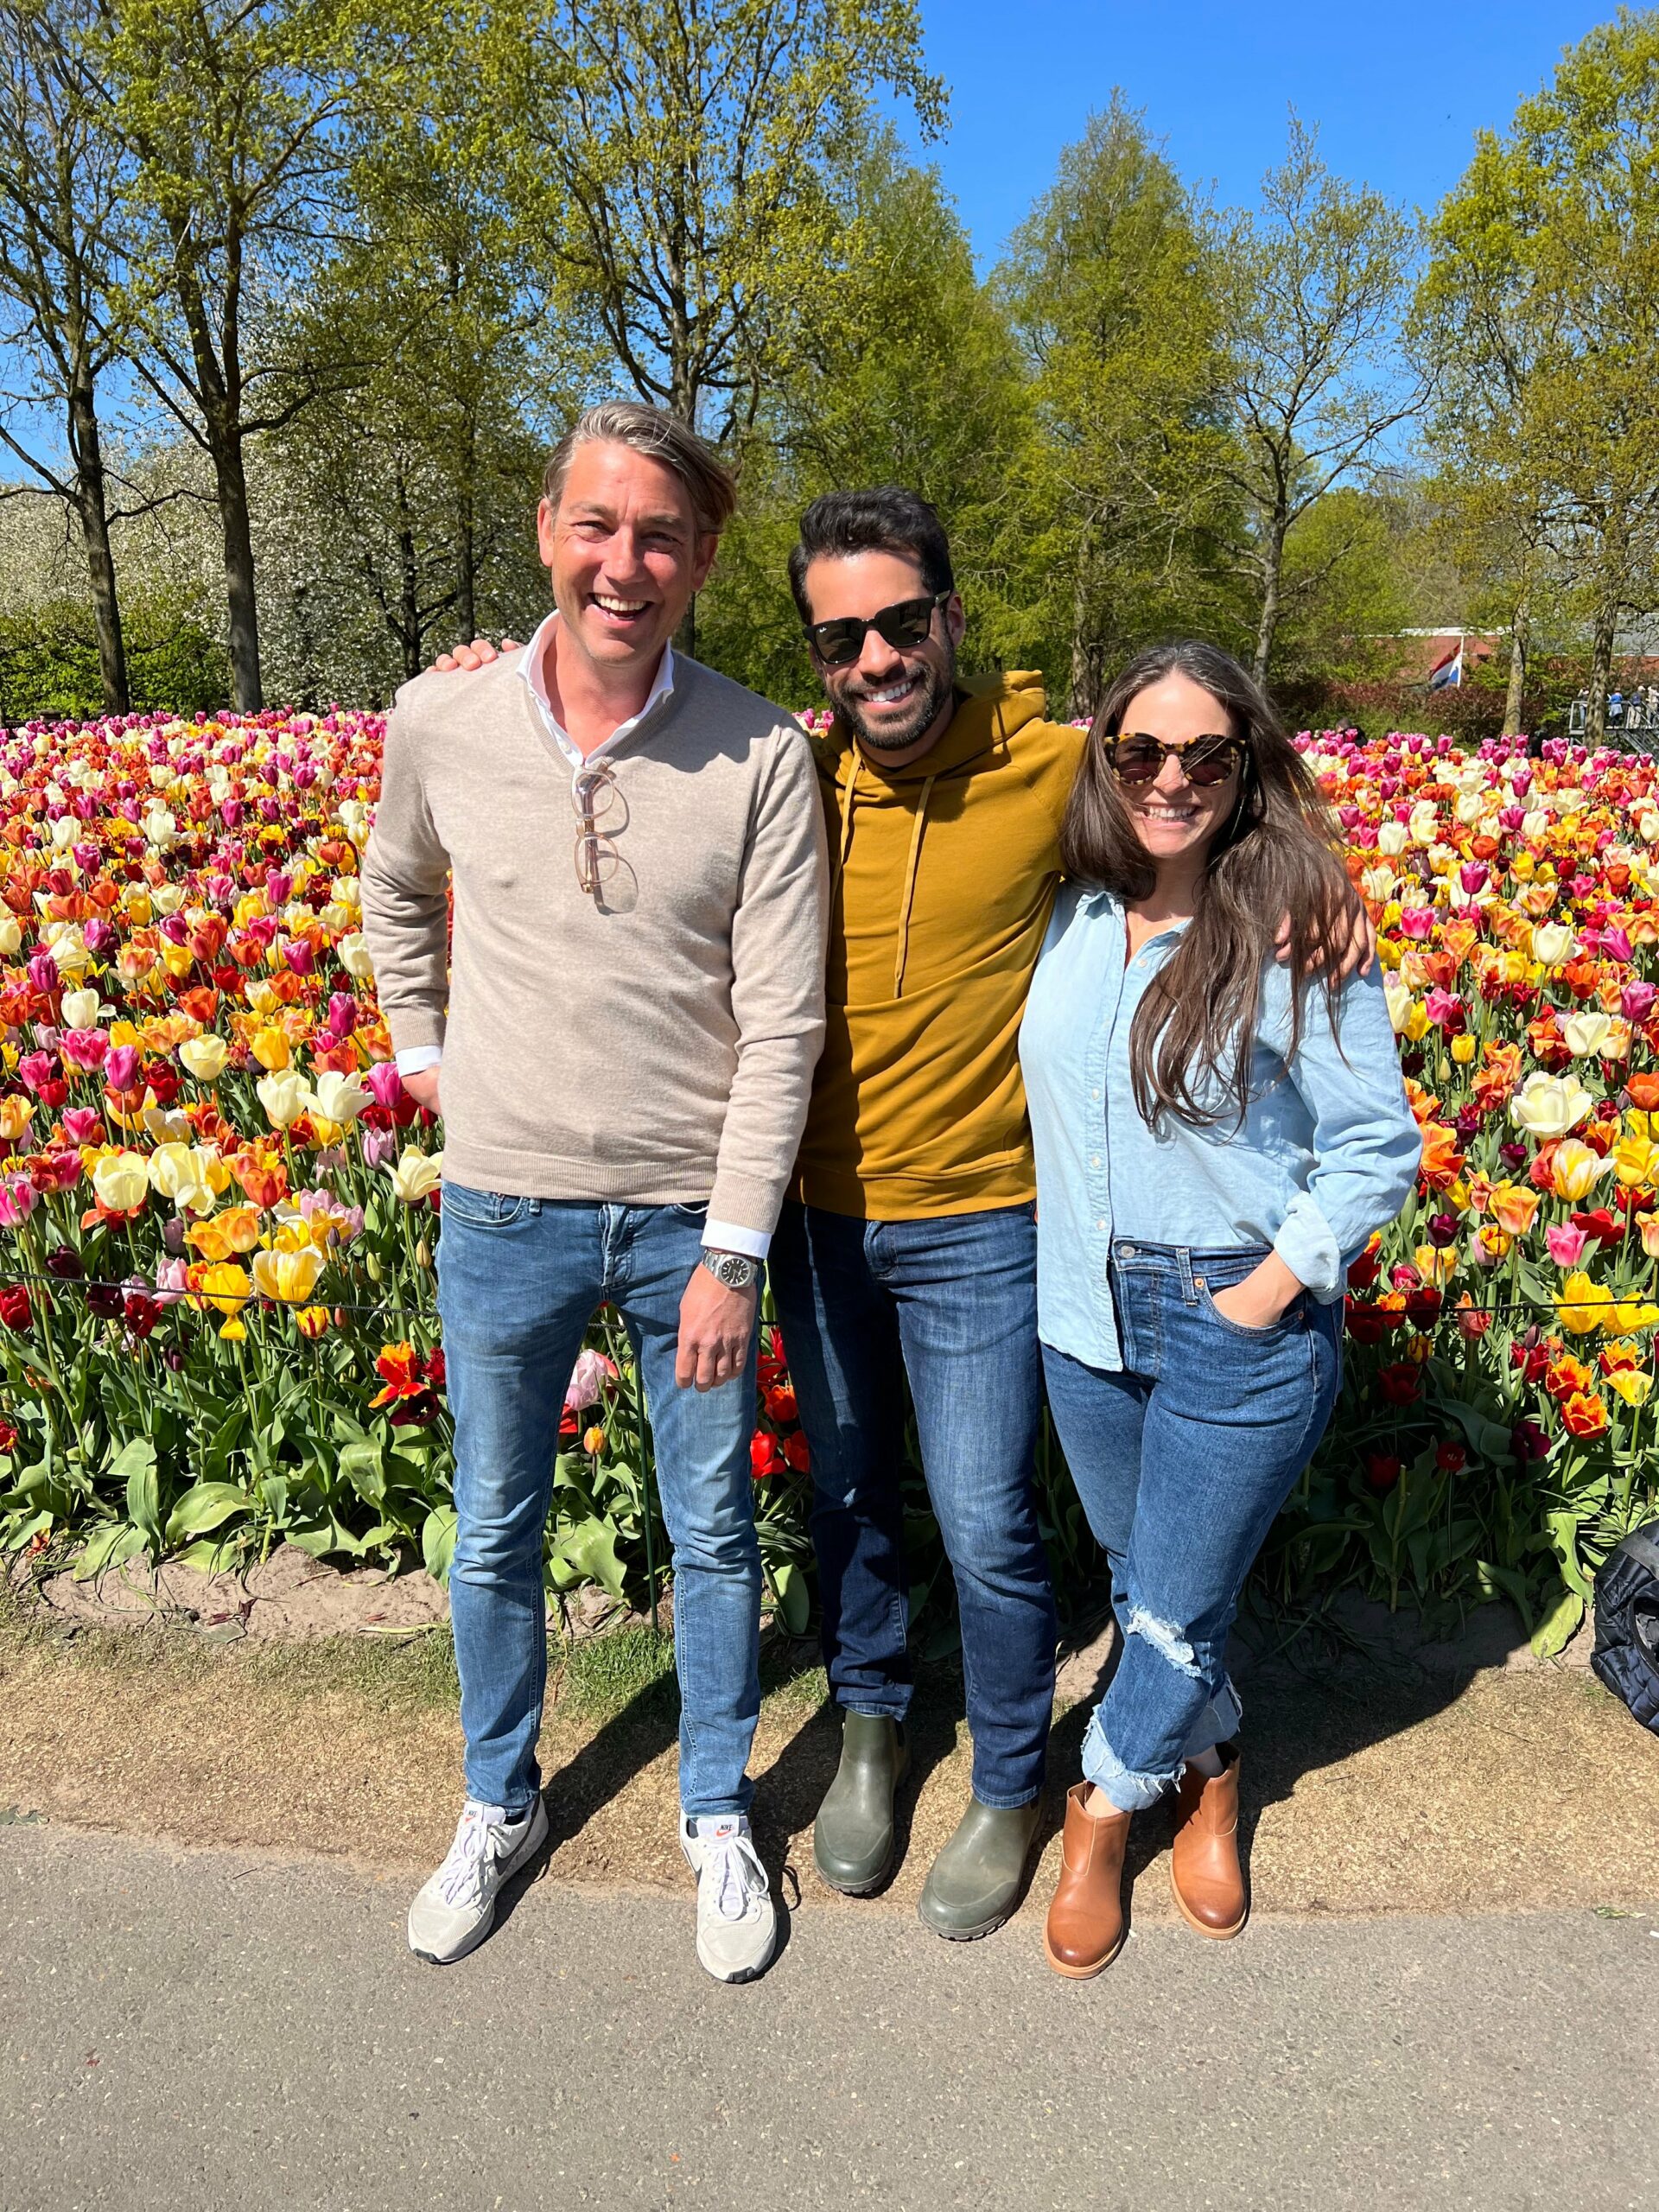 Meet the winners of the trip to Amsterdam - Holland visiting the tulip bulb fields with Ben, owner of RevoGarden Flower Bulbs